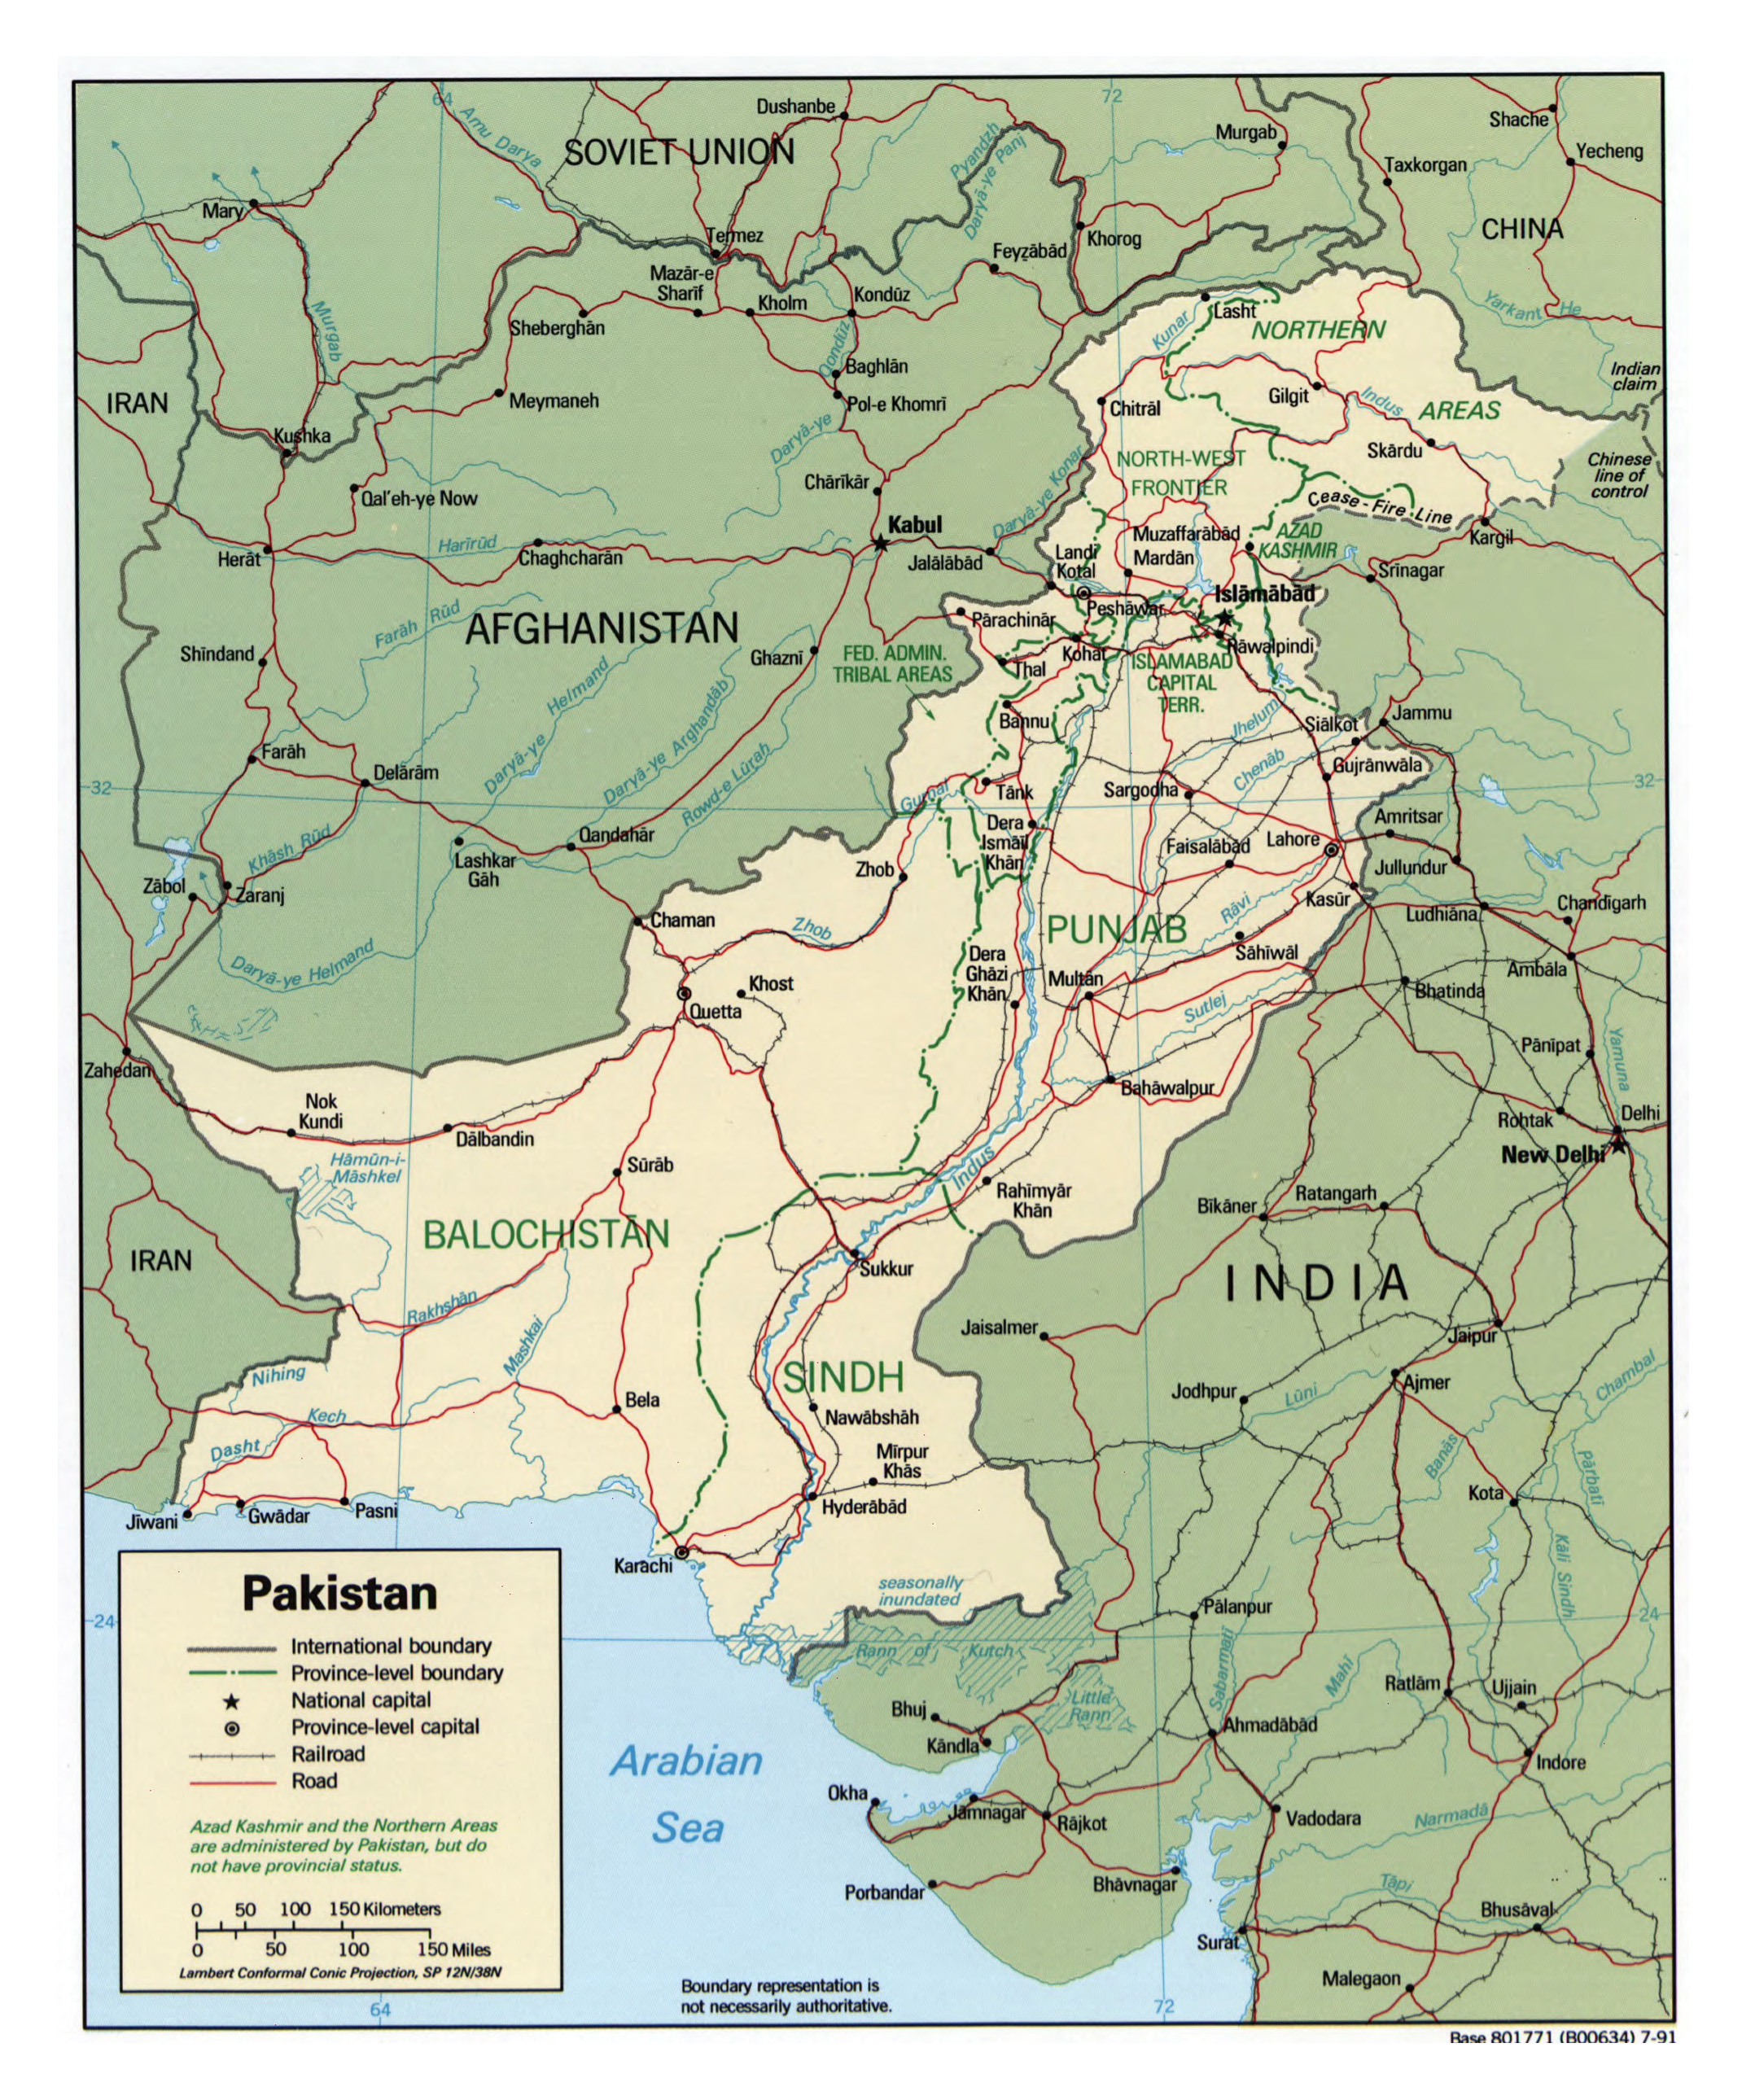 Large Detailed Political And Administrative Map Of Pakistan With Roads Railroads And Major Cities 1991 